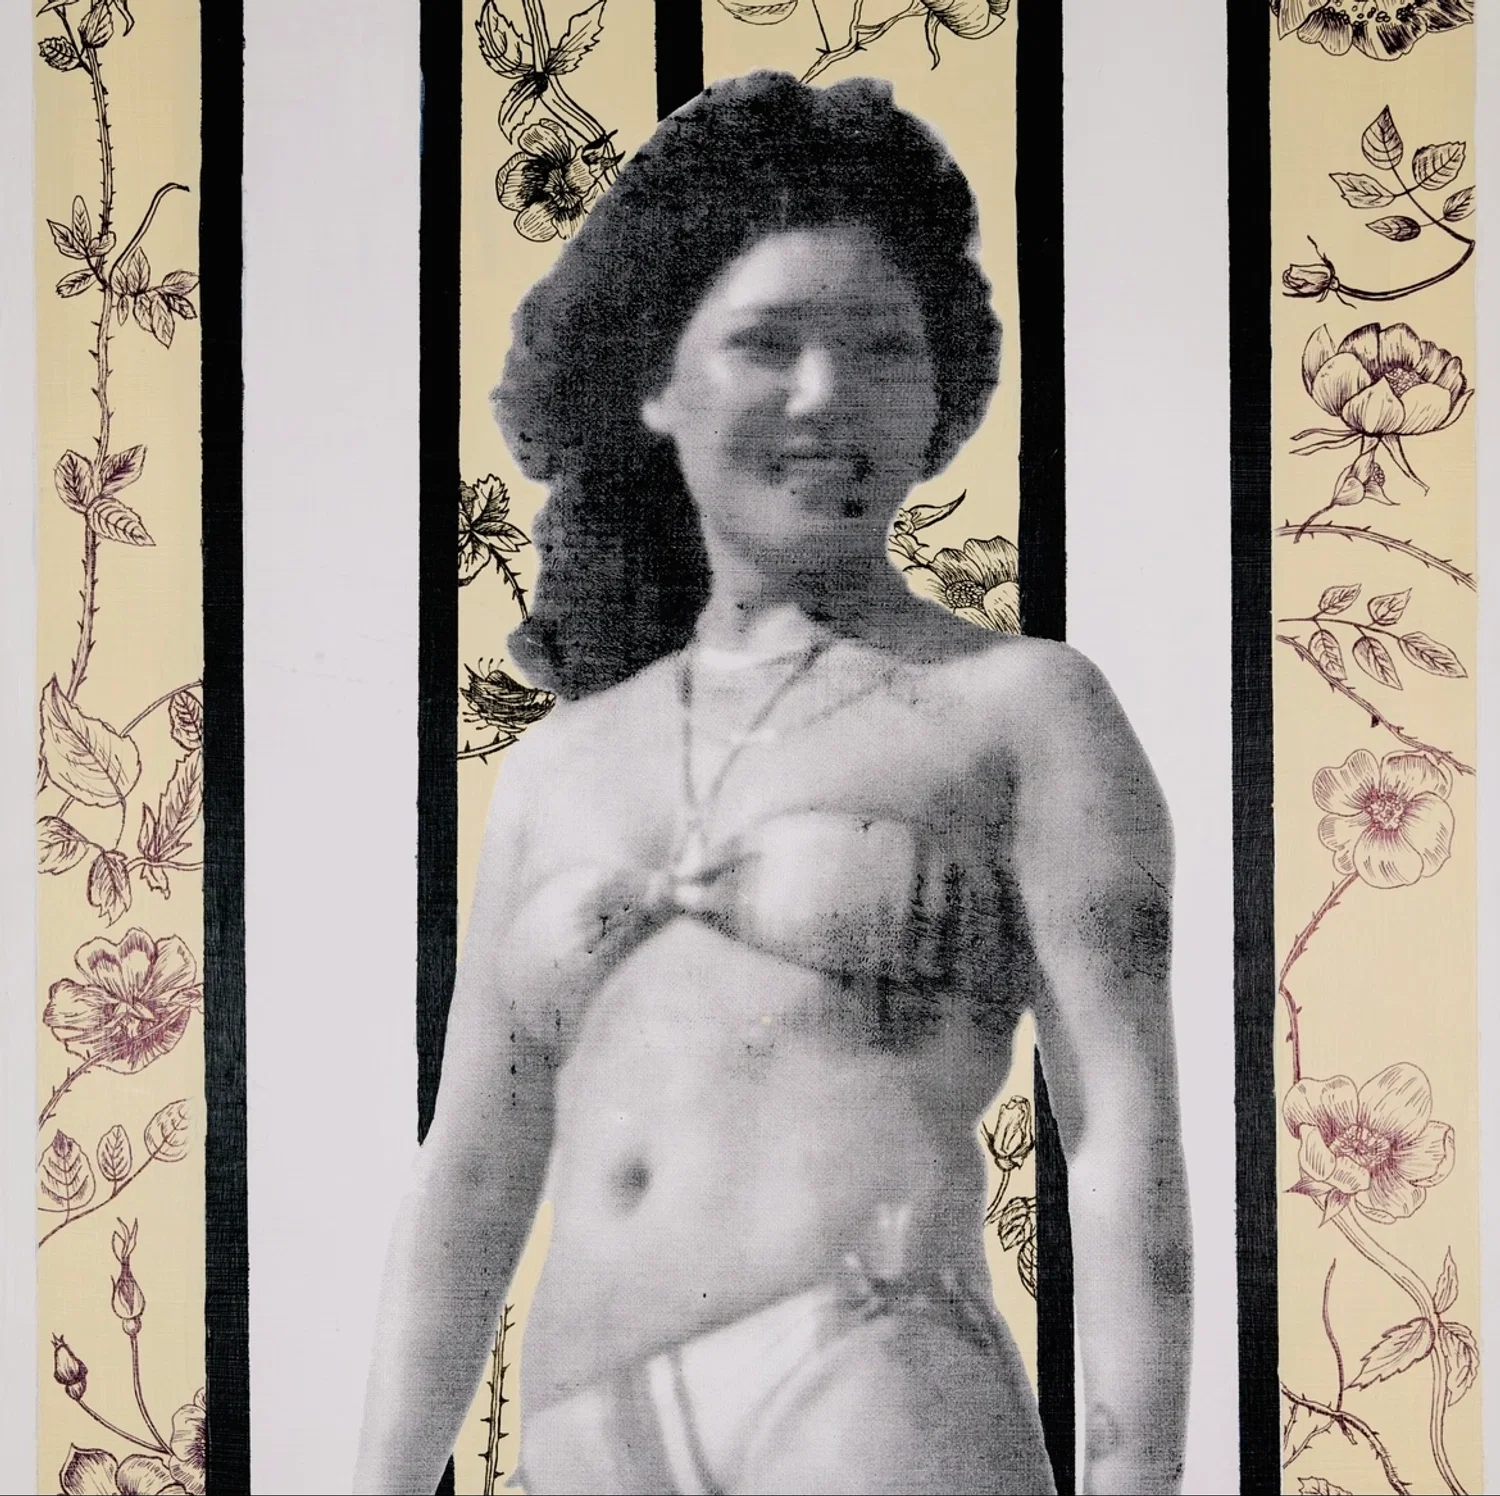 A screen printed photograph of the artist's grandmother is posed in front of a painted, floral background.